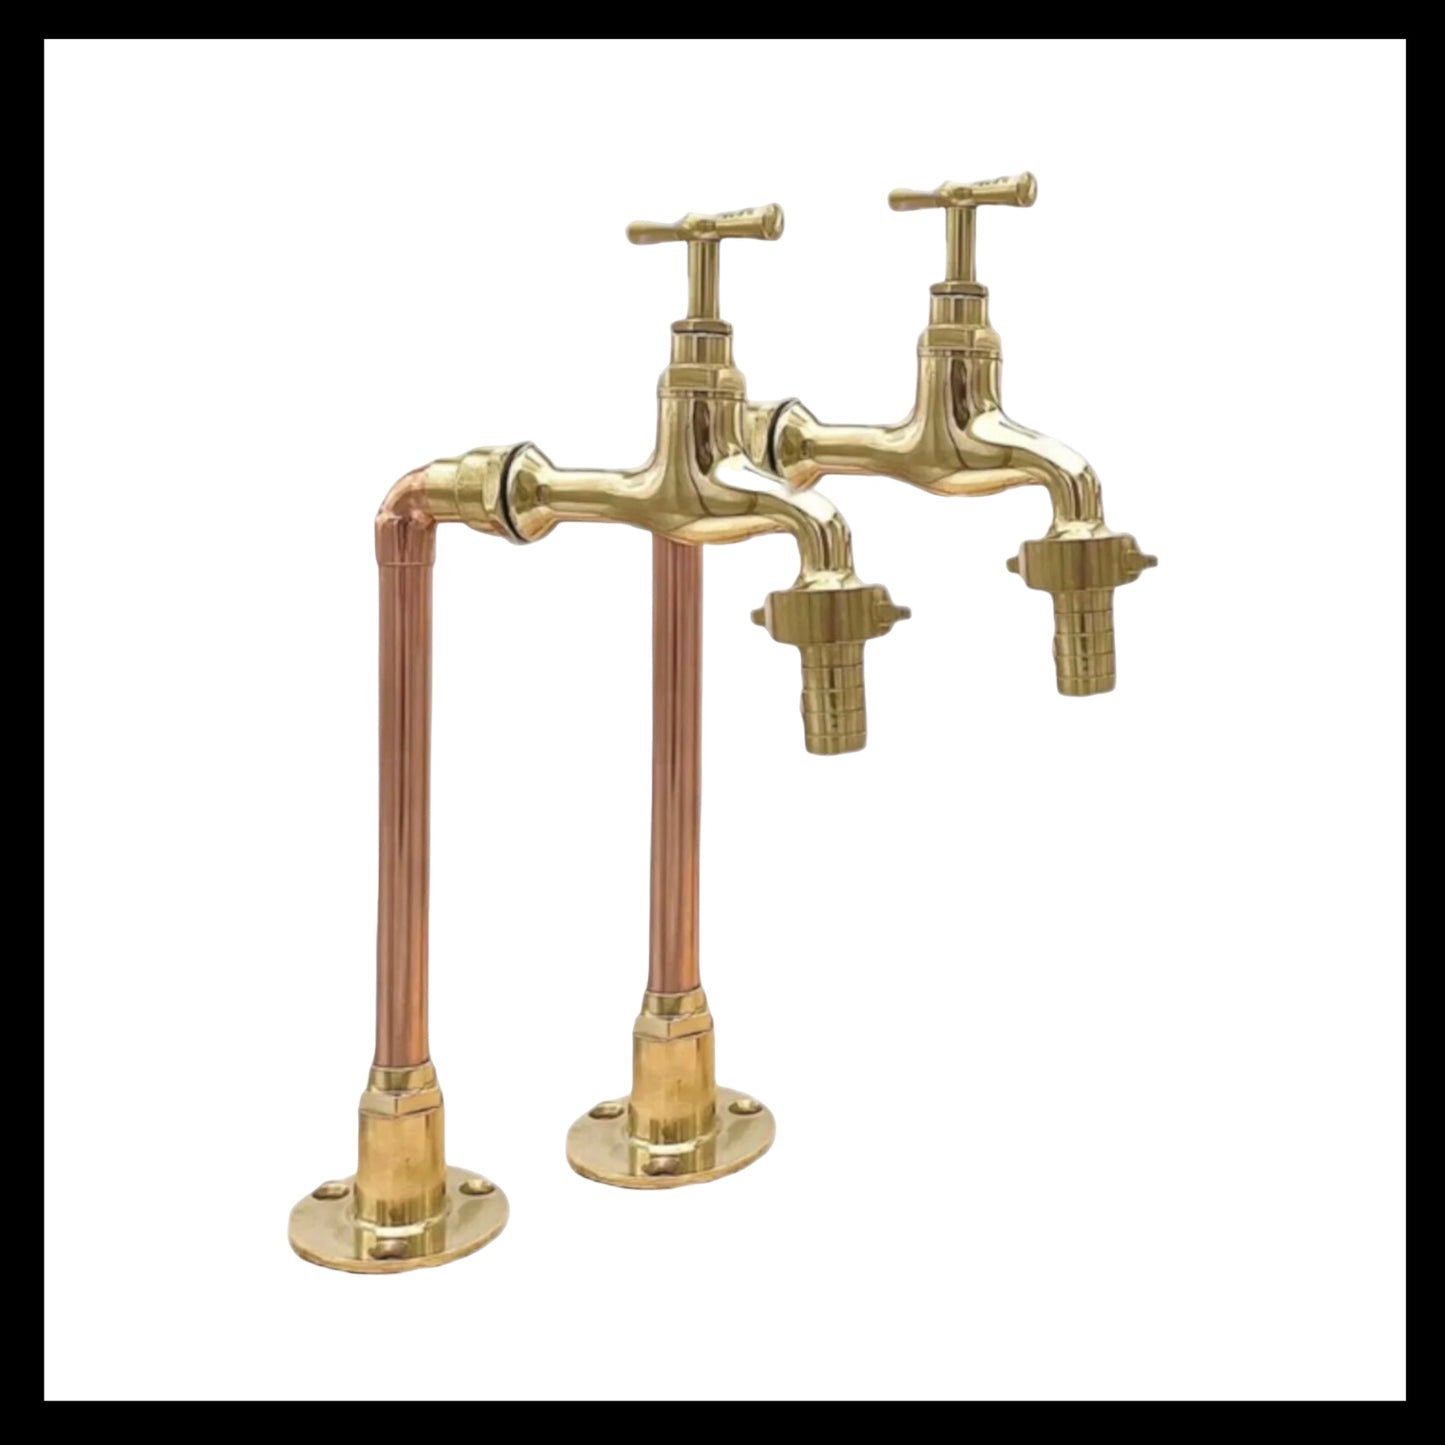 image Pair of handmade copper and brass kitchen or bathroom taps sold by All Things French Store